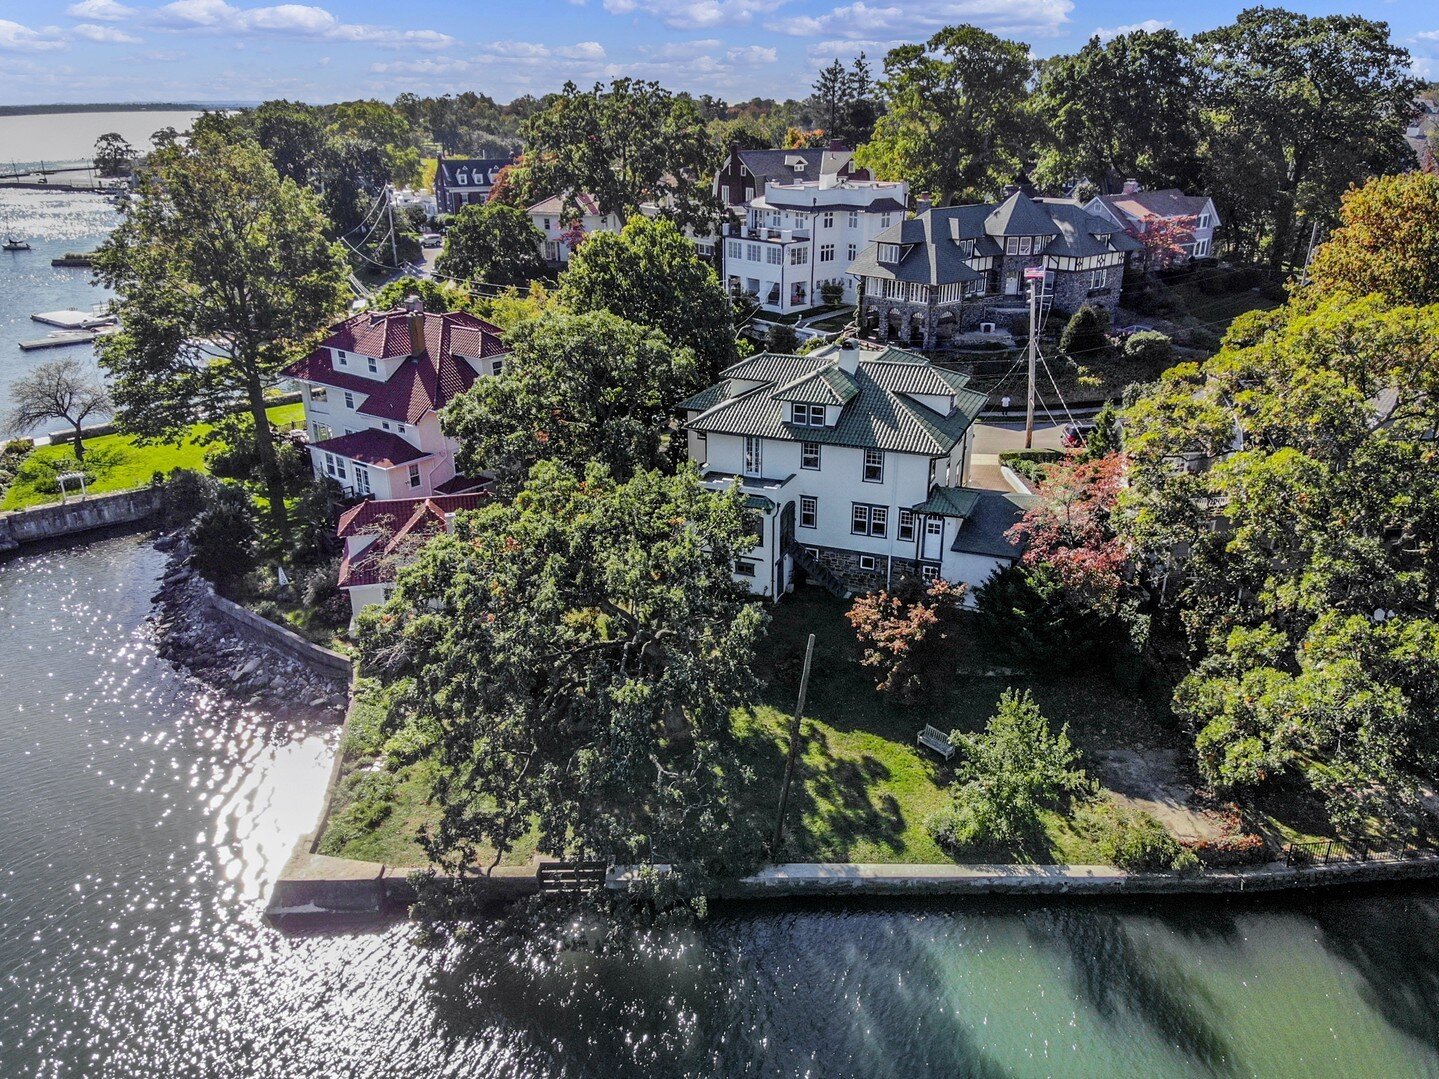 Do you have a Aerial view of your clients home? We do.

#realestate
#realestatemarketing
#photographyservices
#realestatephotography
#losangeles #LA 
#newyork #NY 
#tampa #FL 
#connecticut
#matterportwalkthroughs
#virtualshowroom
#virtualstaging
#3df